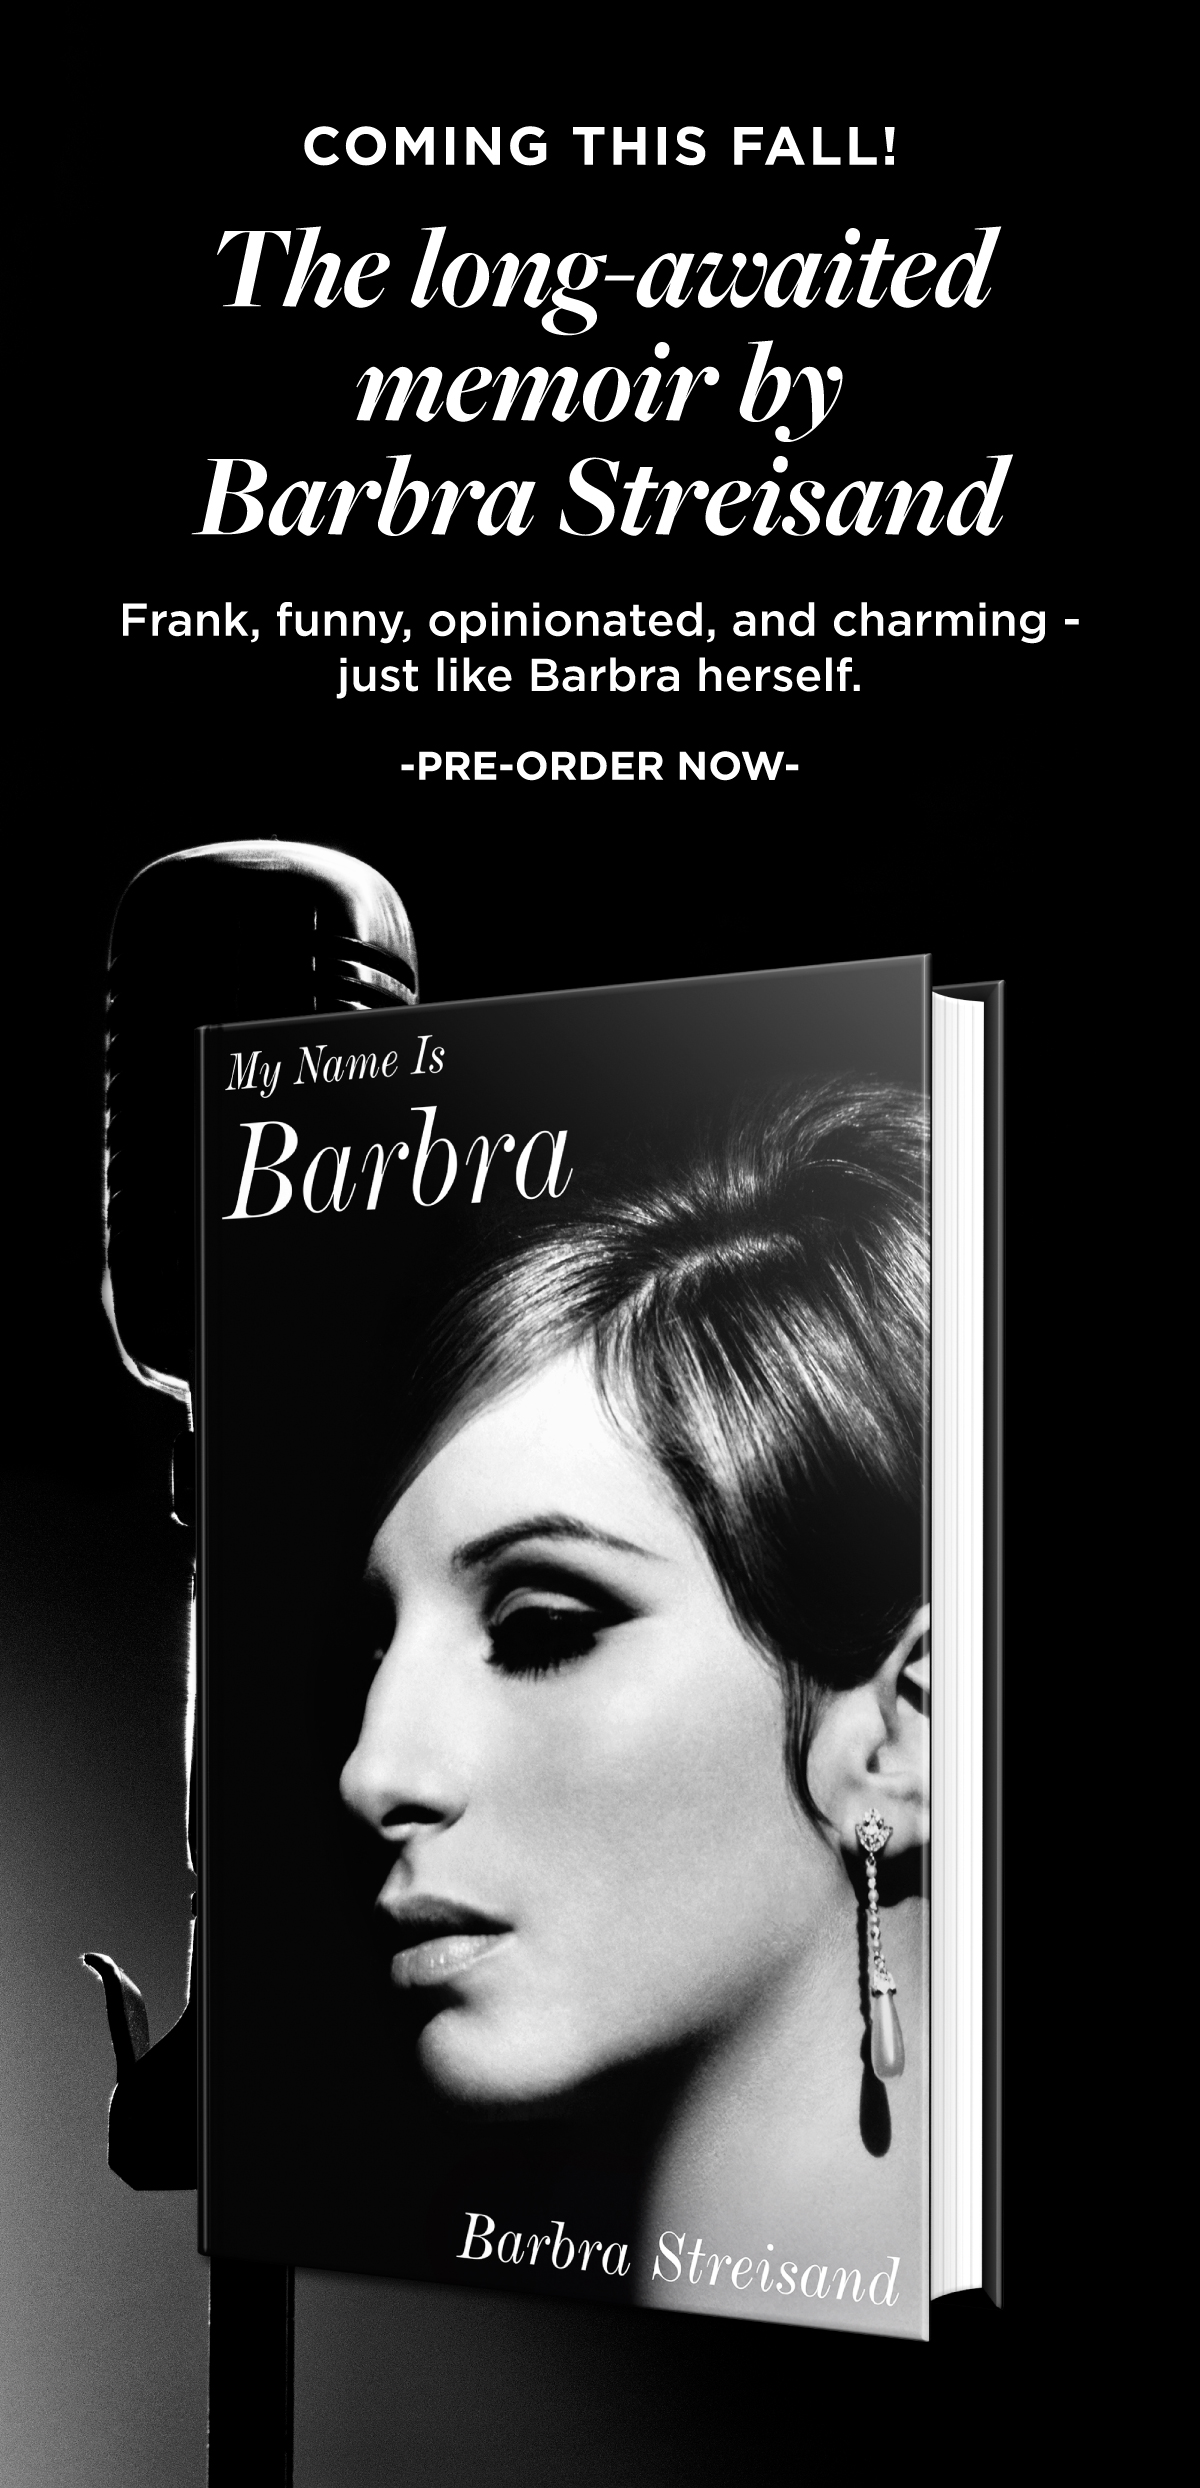 COMING THIS FALL! N T I e memoir by Barbra Streisand Frank, funny, opinionated, and charming - just like Barbra herself. -PRE-ORDER NOW- 